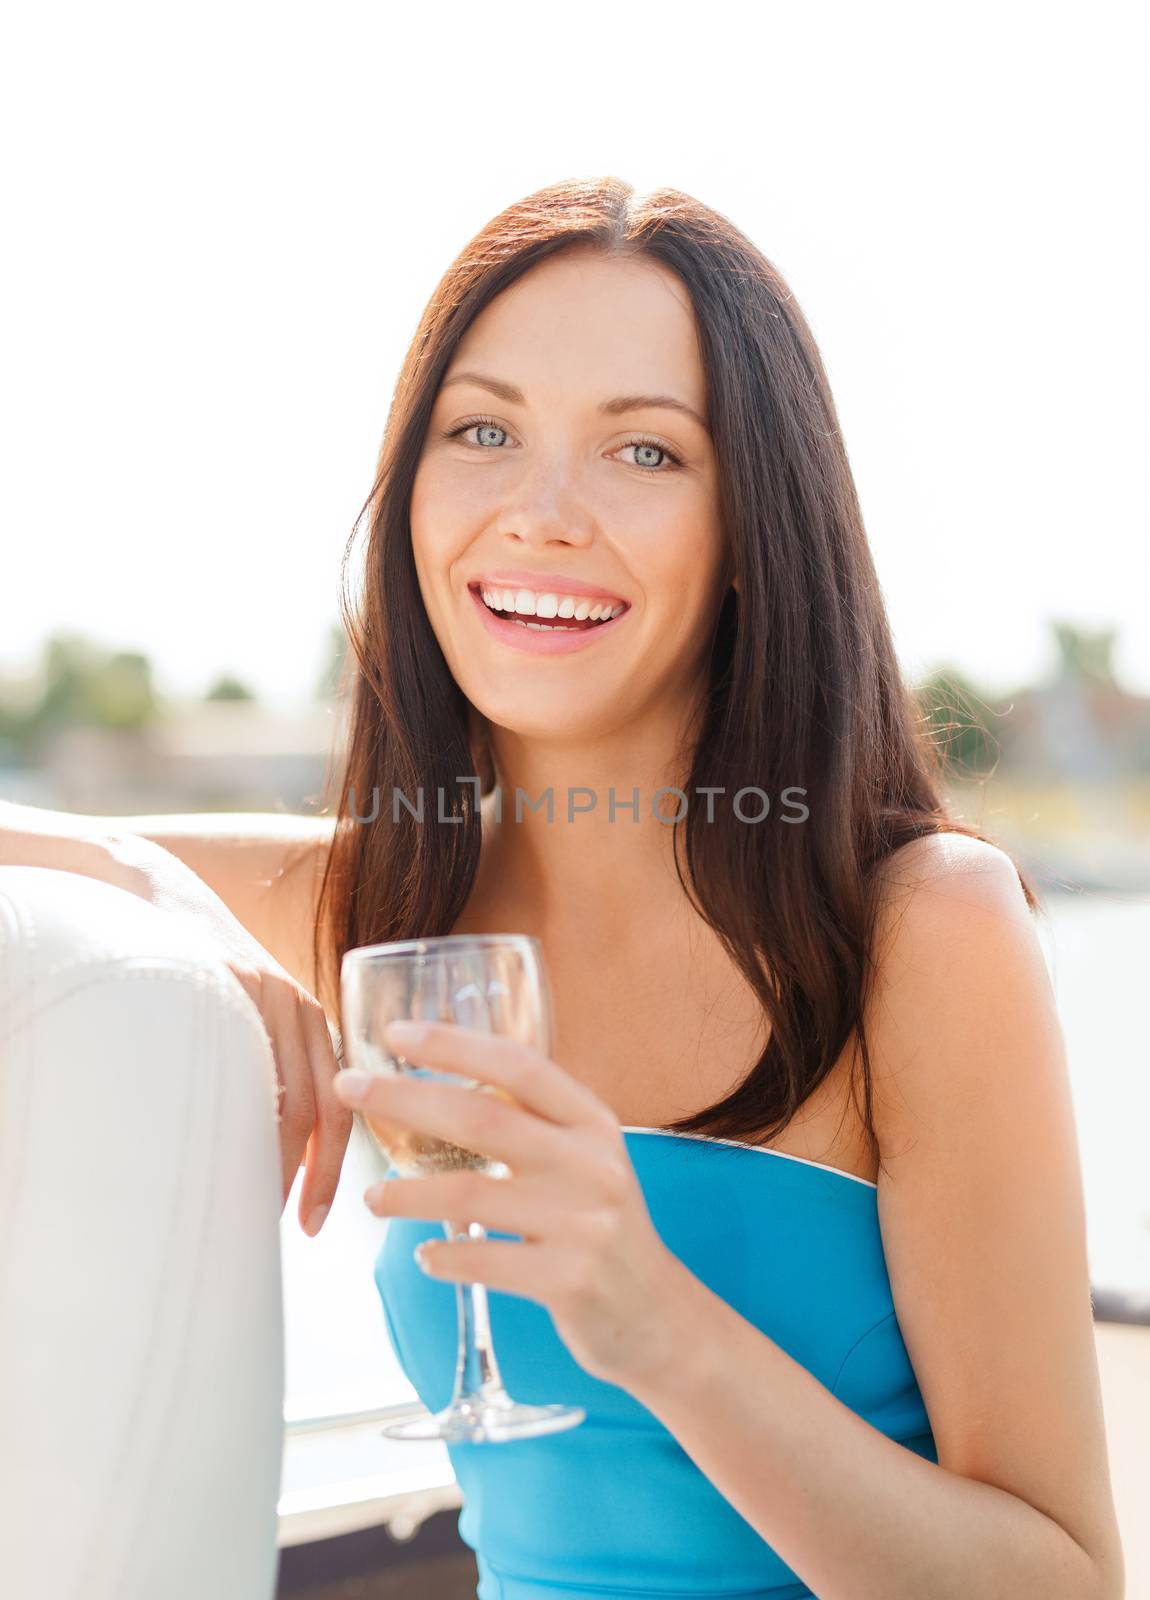 summer holidays, vacation and celebration concept - laughing girl with champagne glass